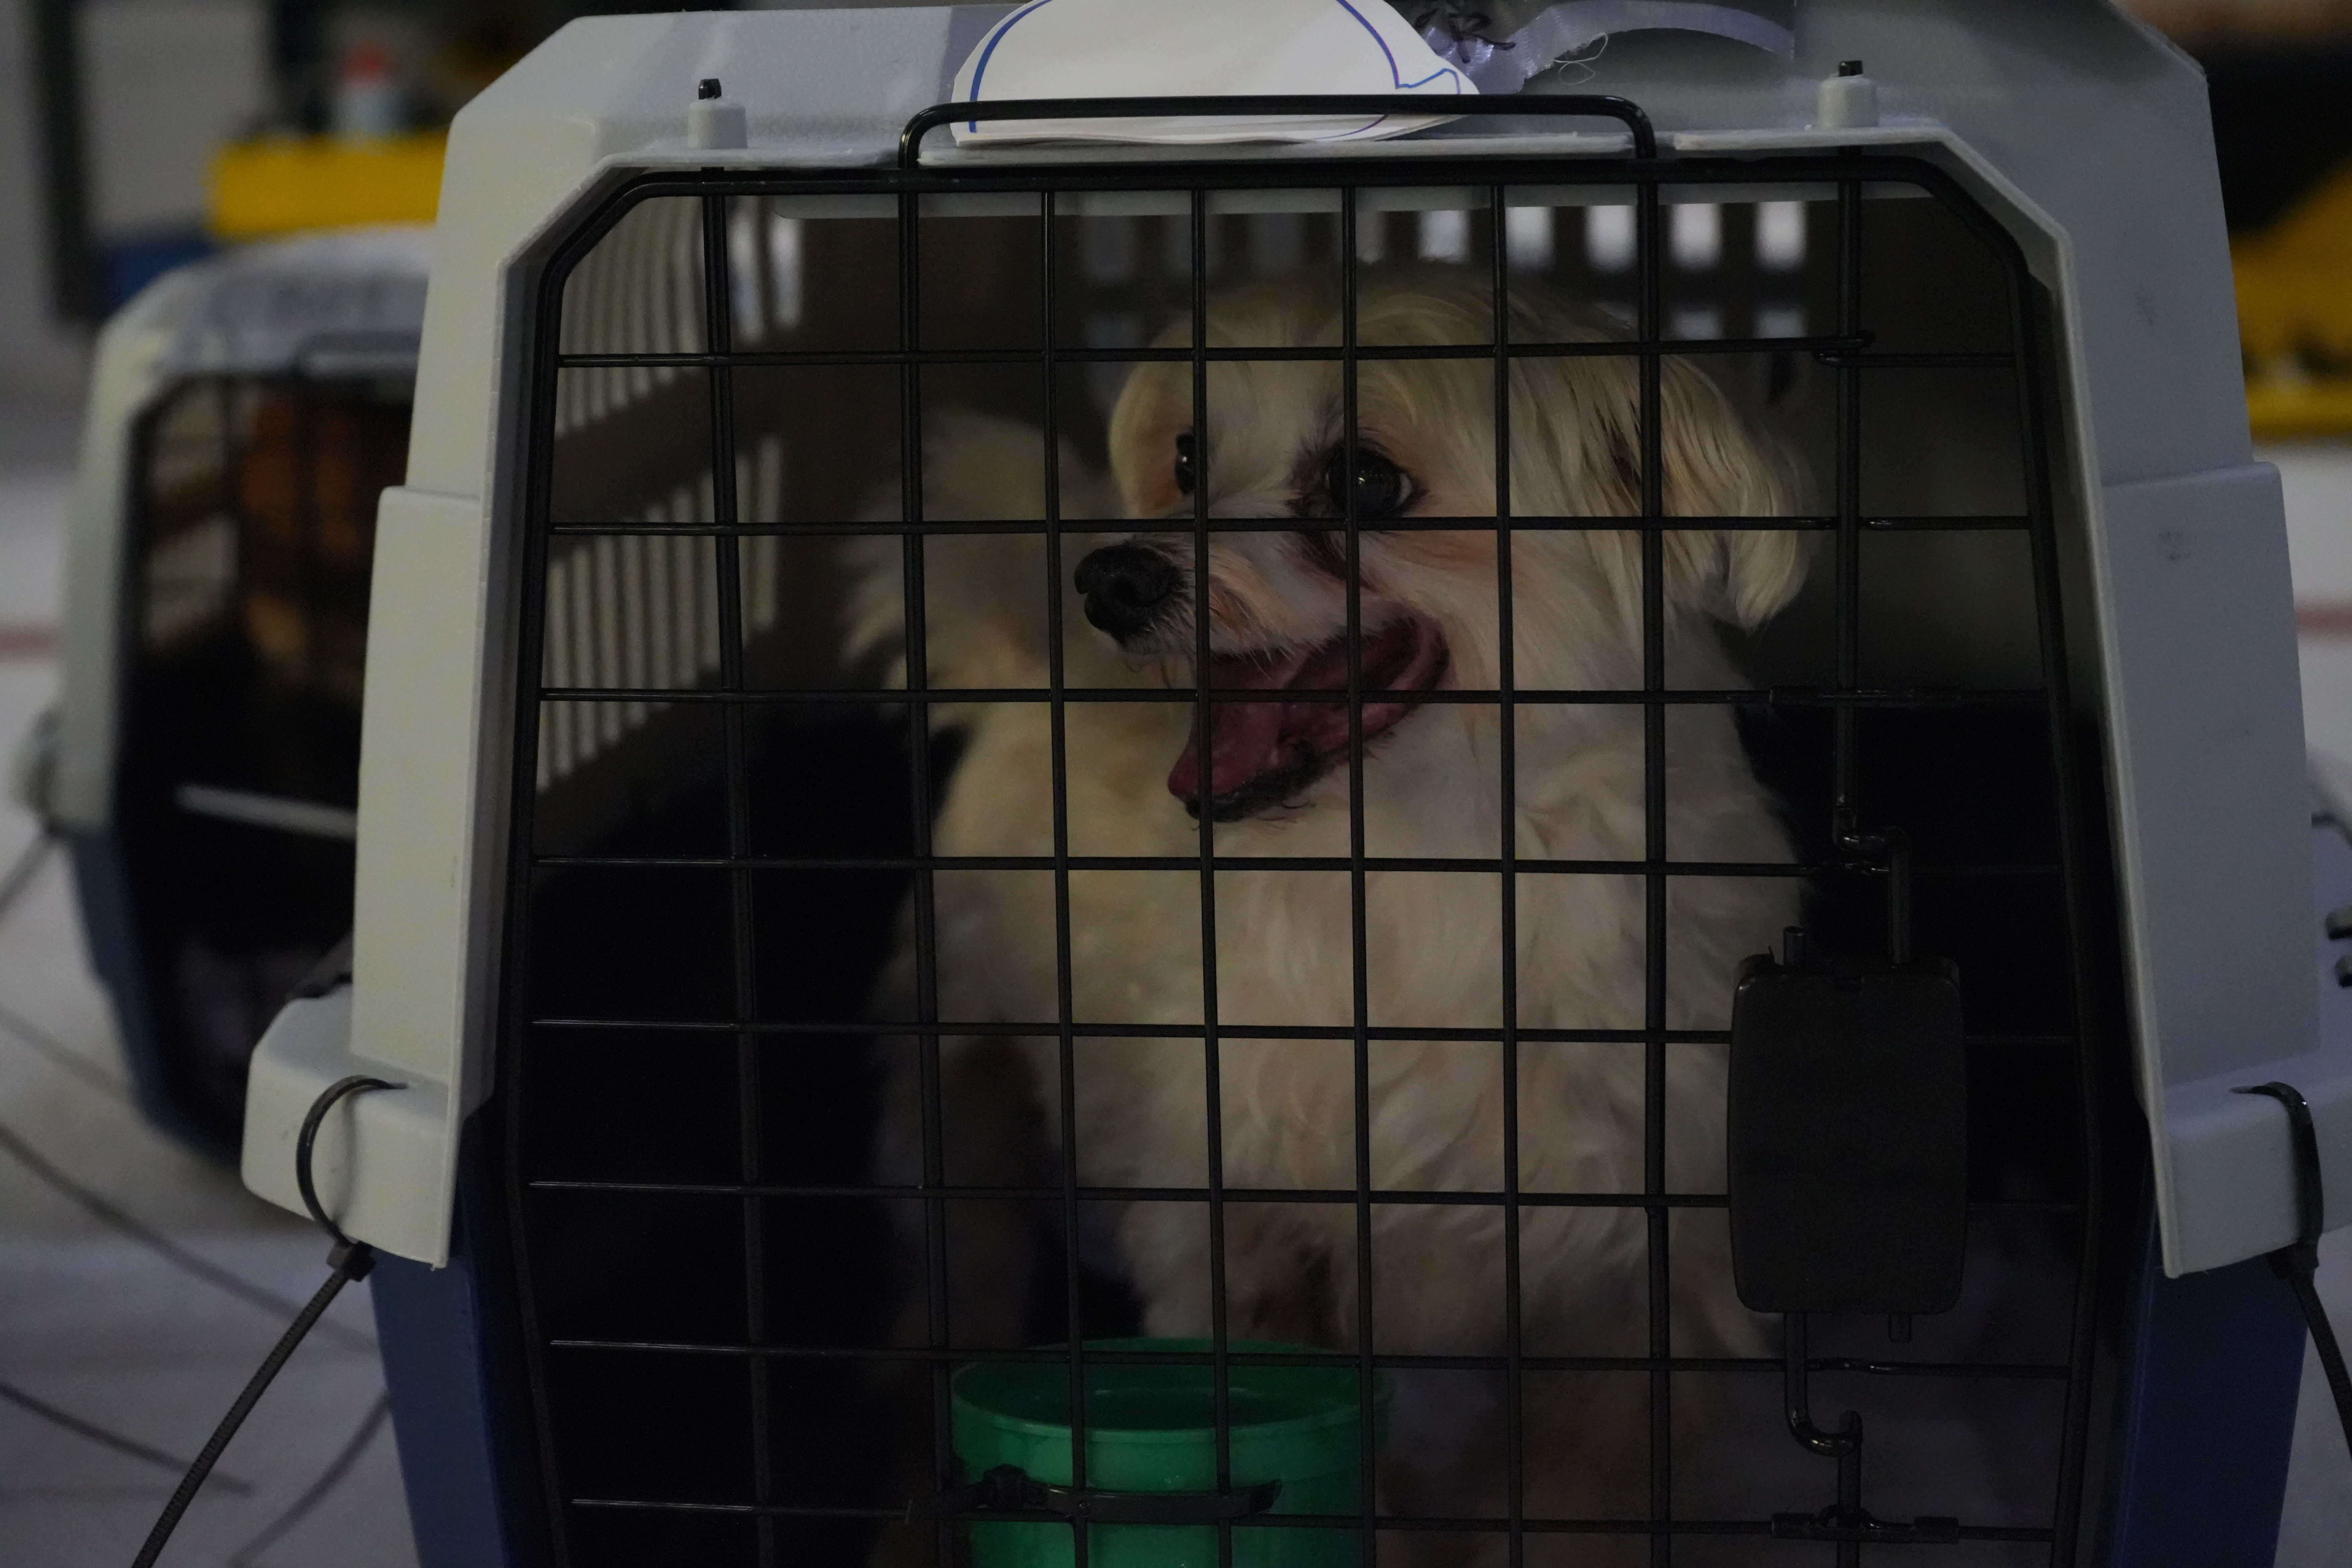 MSPCA Rescues 21 Cats, Dogs From 'Hoarding House' – NBC Boston